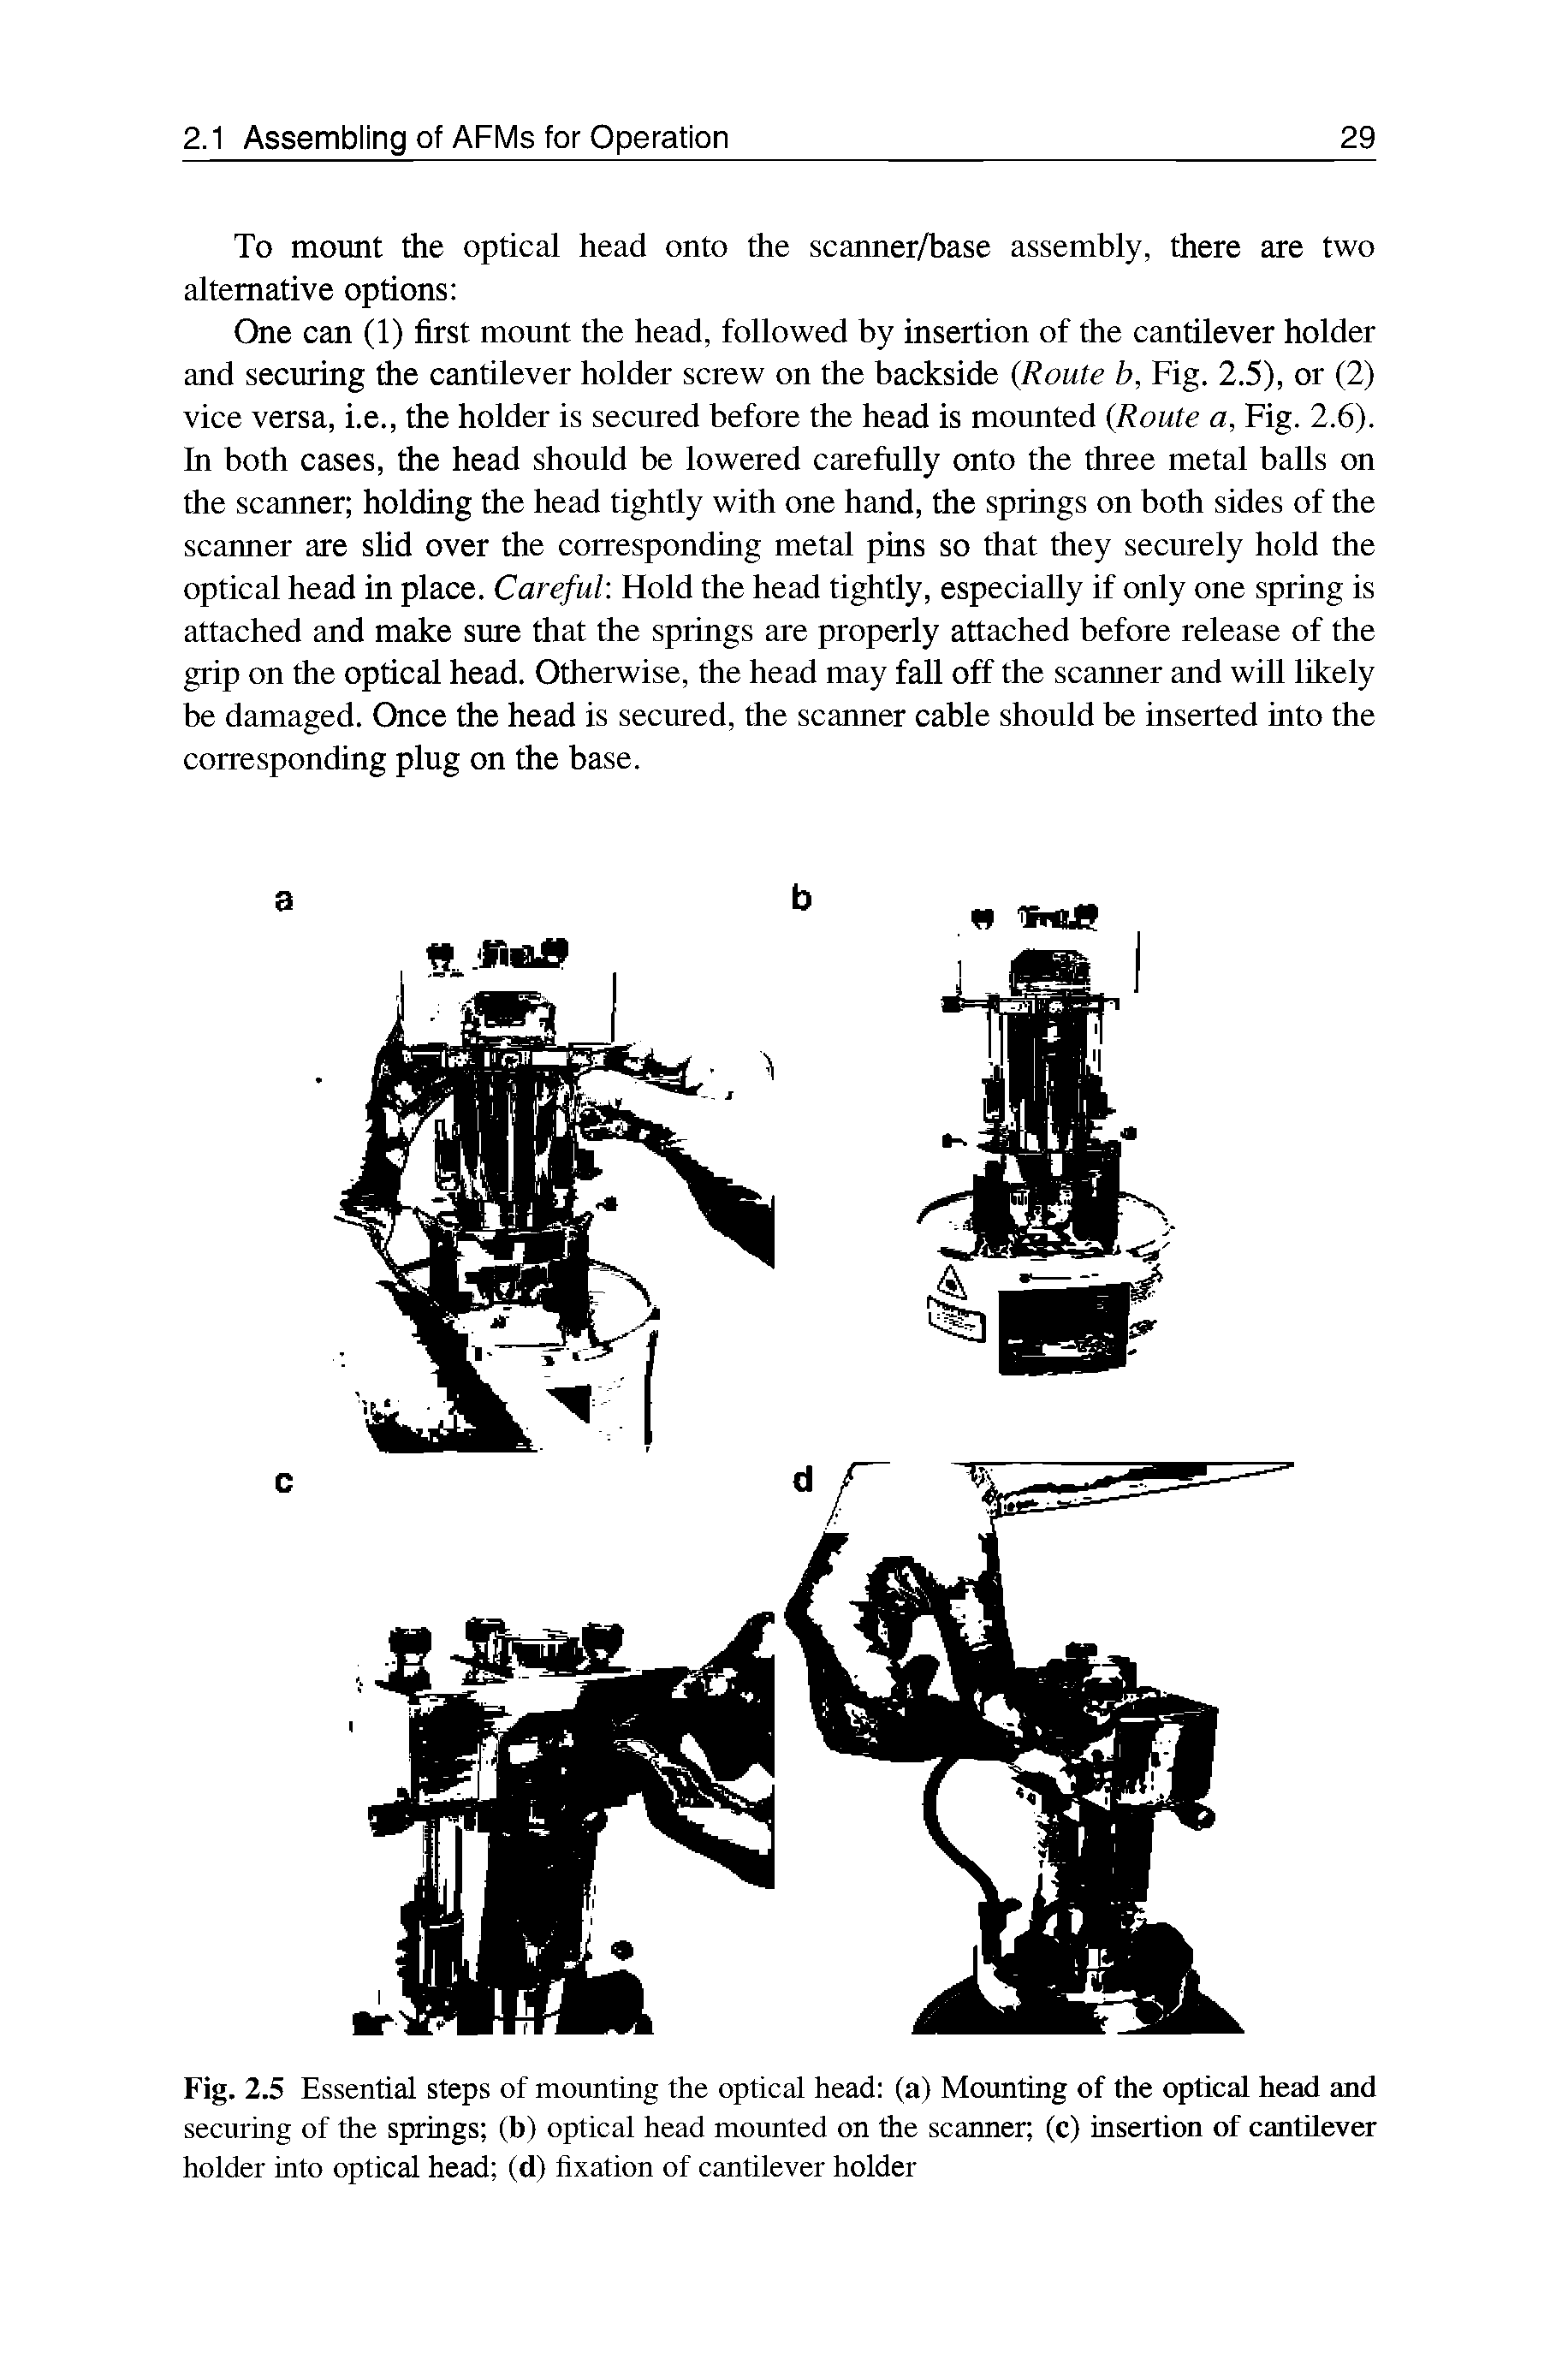 Fig. 2.5 Essential steps of mounting the optical head (a) Mounting of the optical head and securing of the springs (b) optical head mounted on the scanner (c) insertion of cantilever holder into optical head (d) fixation of cantilever holder...